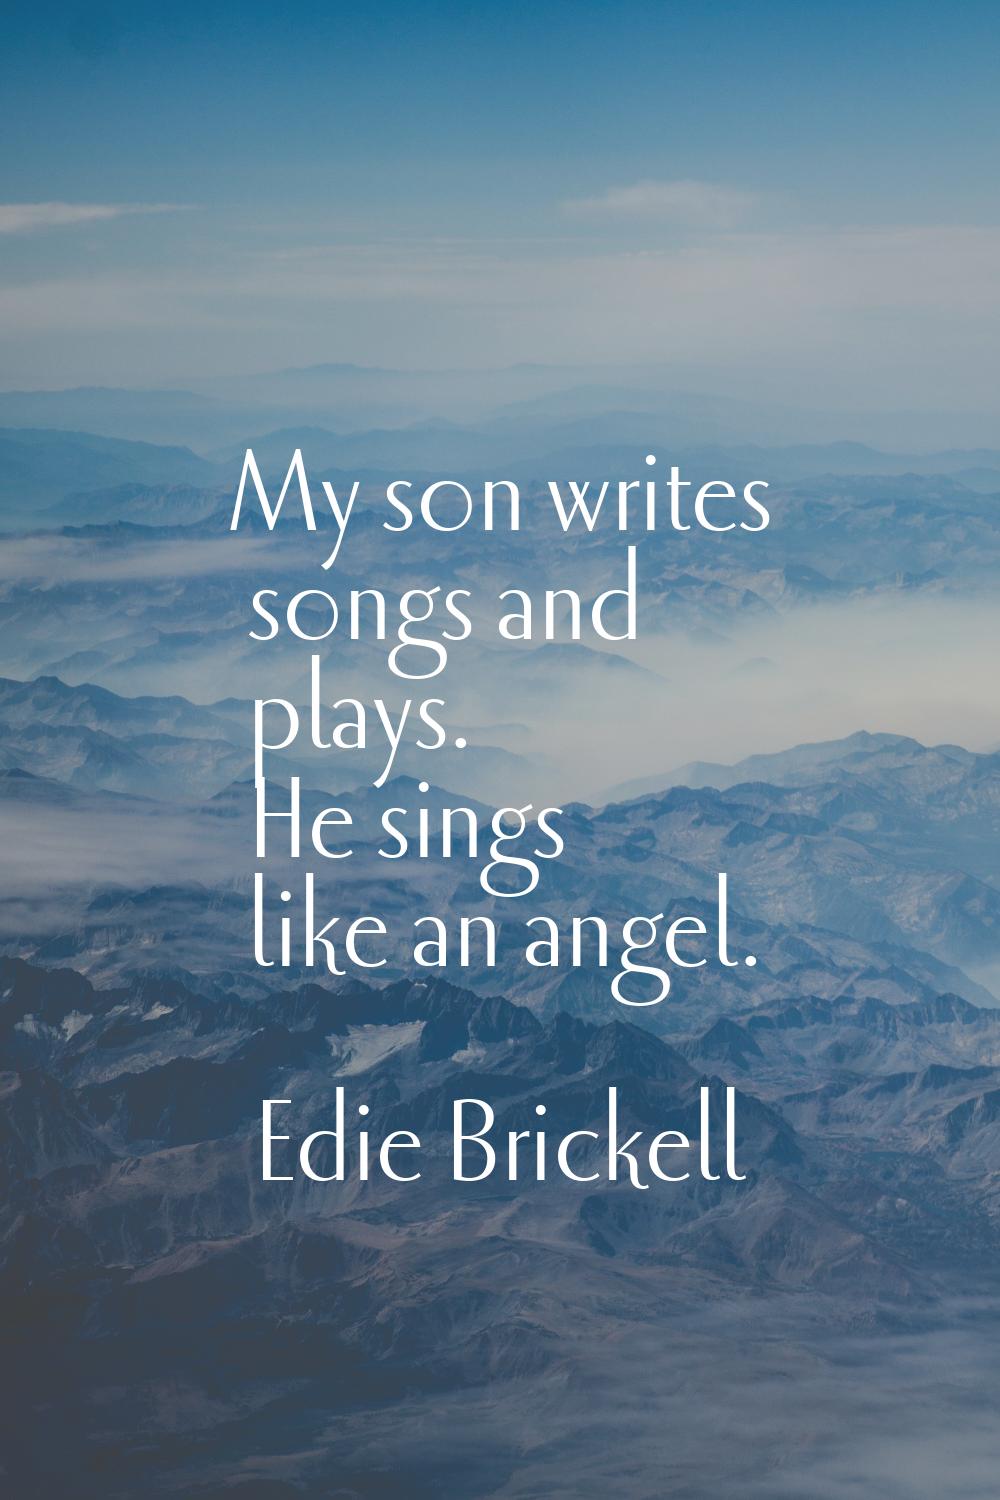 My son writes songs and plays. He sings like an angel.